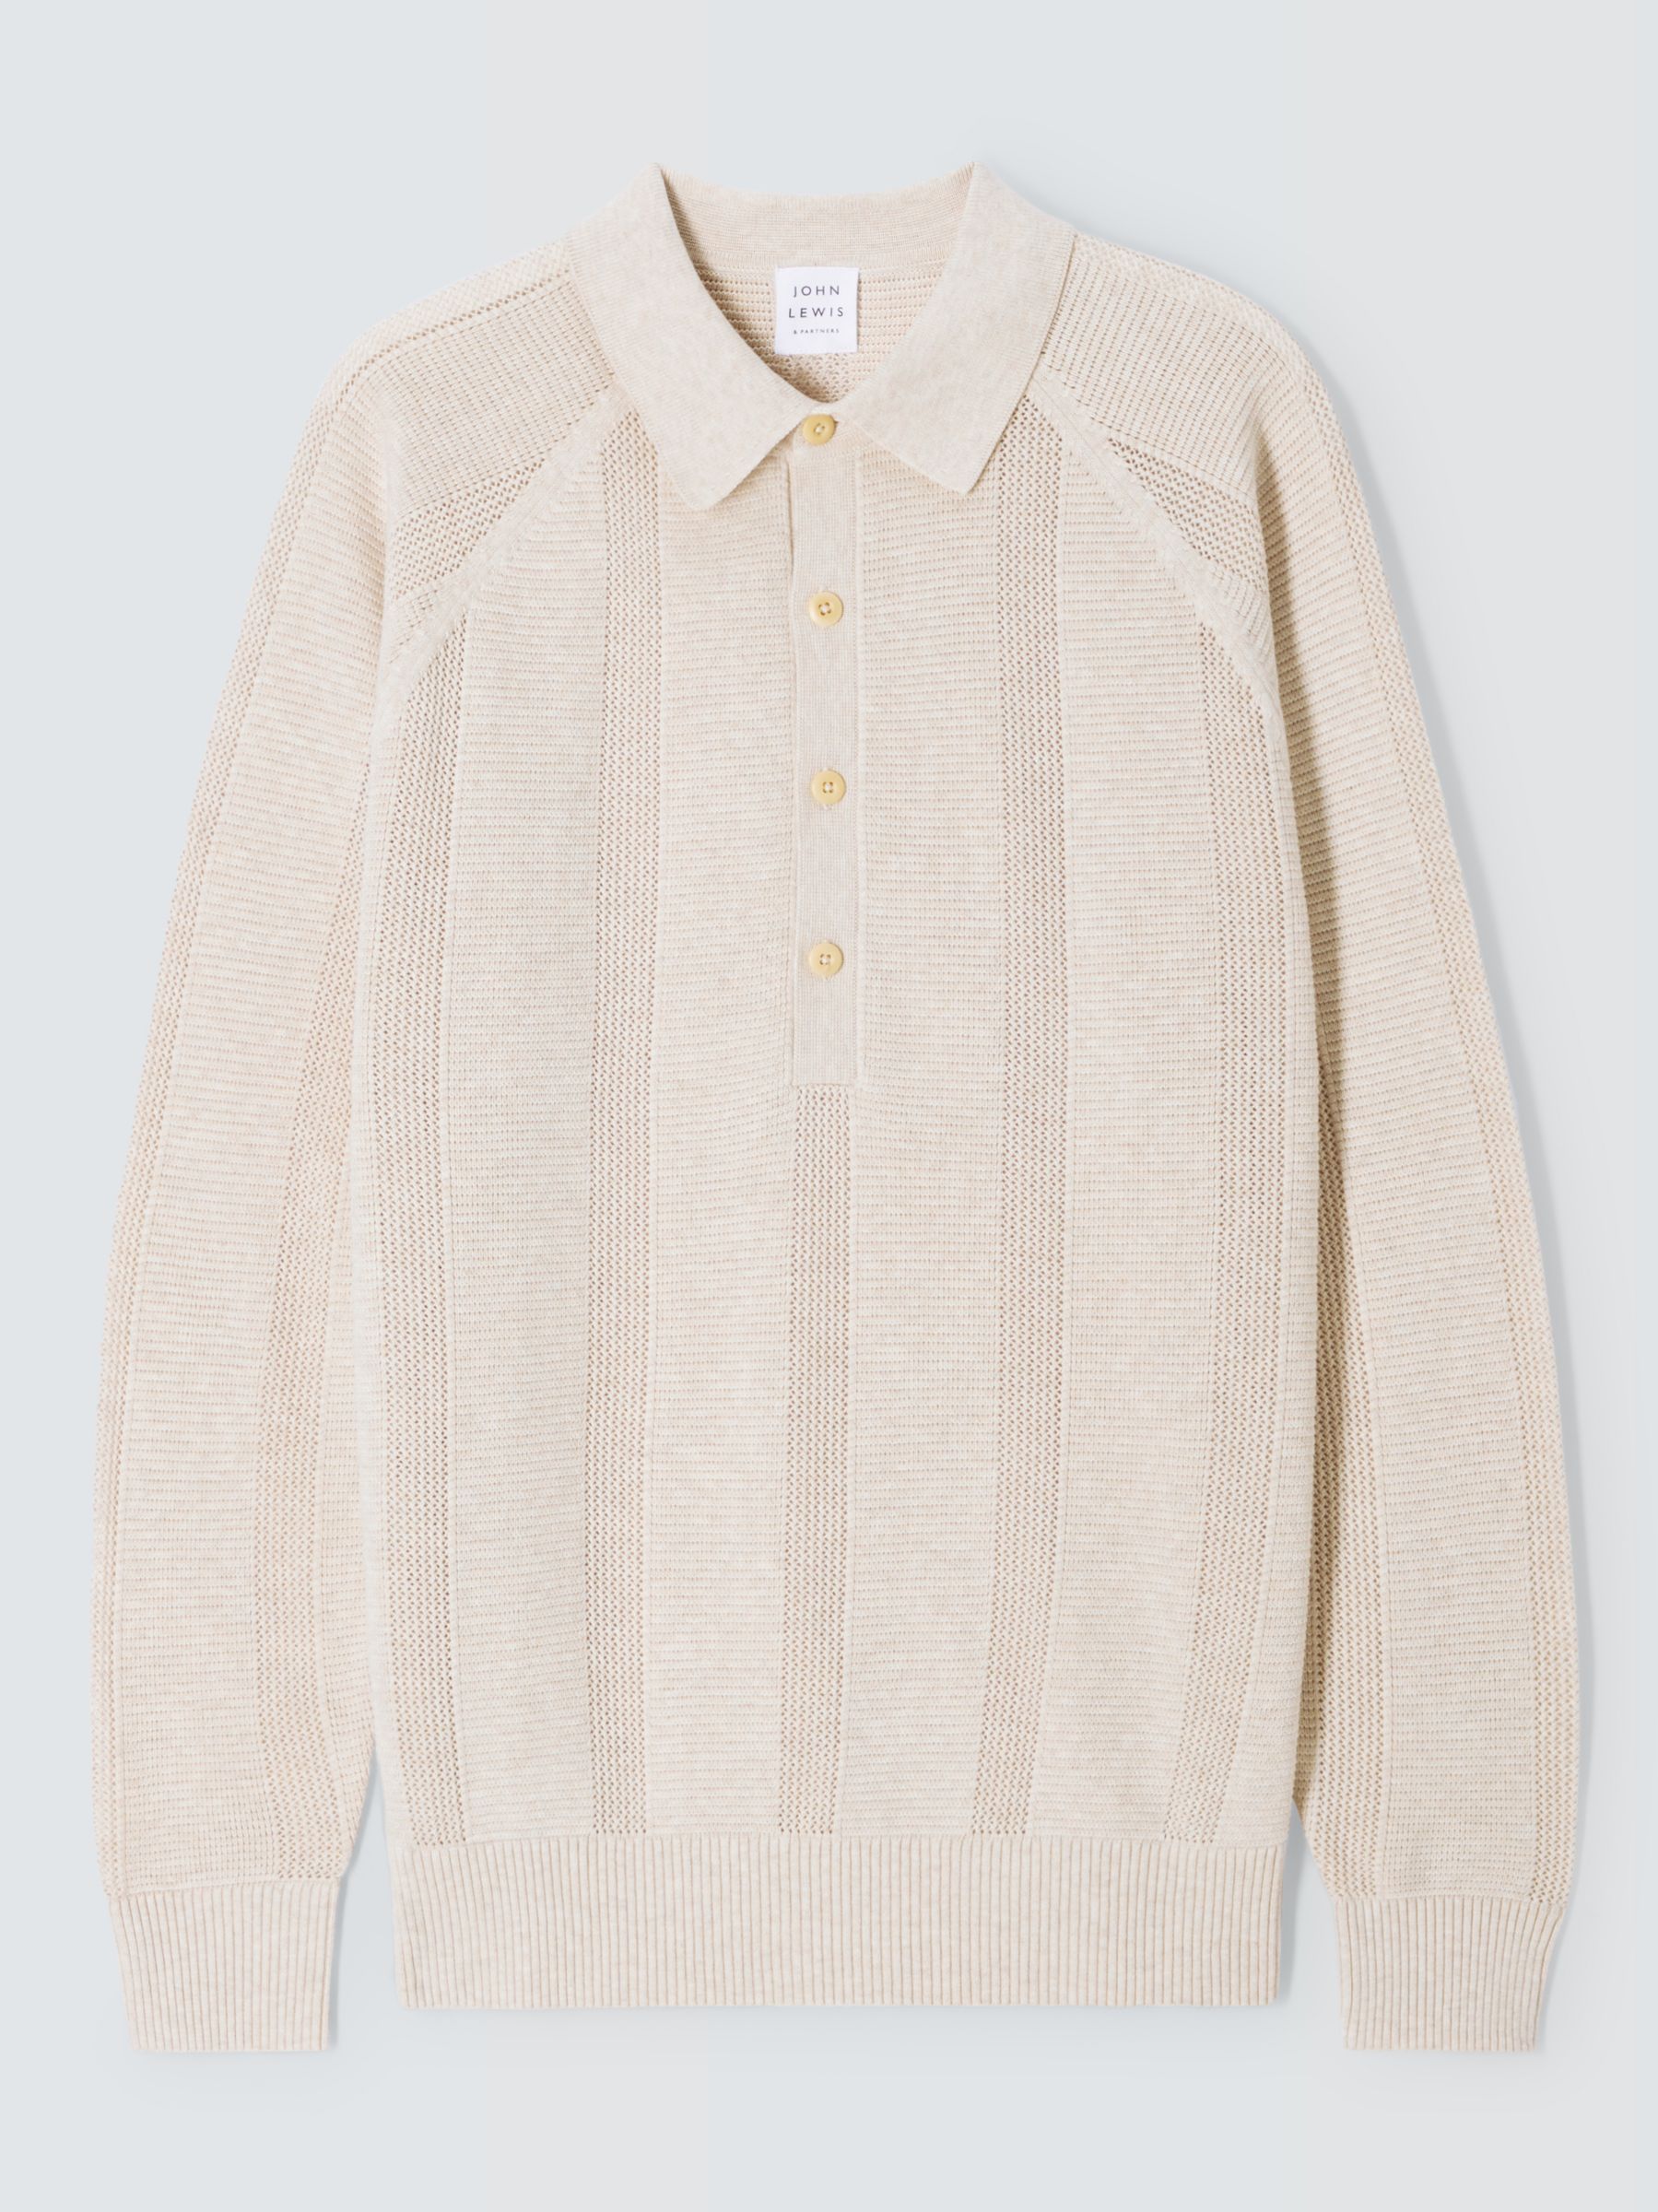 John Lewis Long Sleeve Cotton Textured Knit Polo, Natural, L